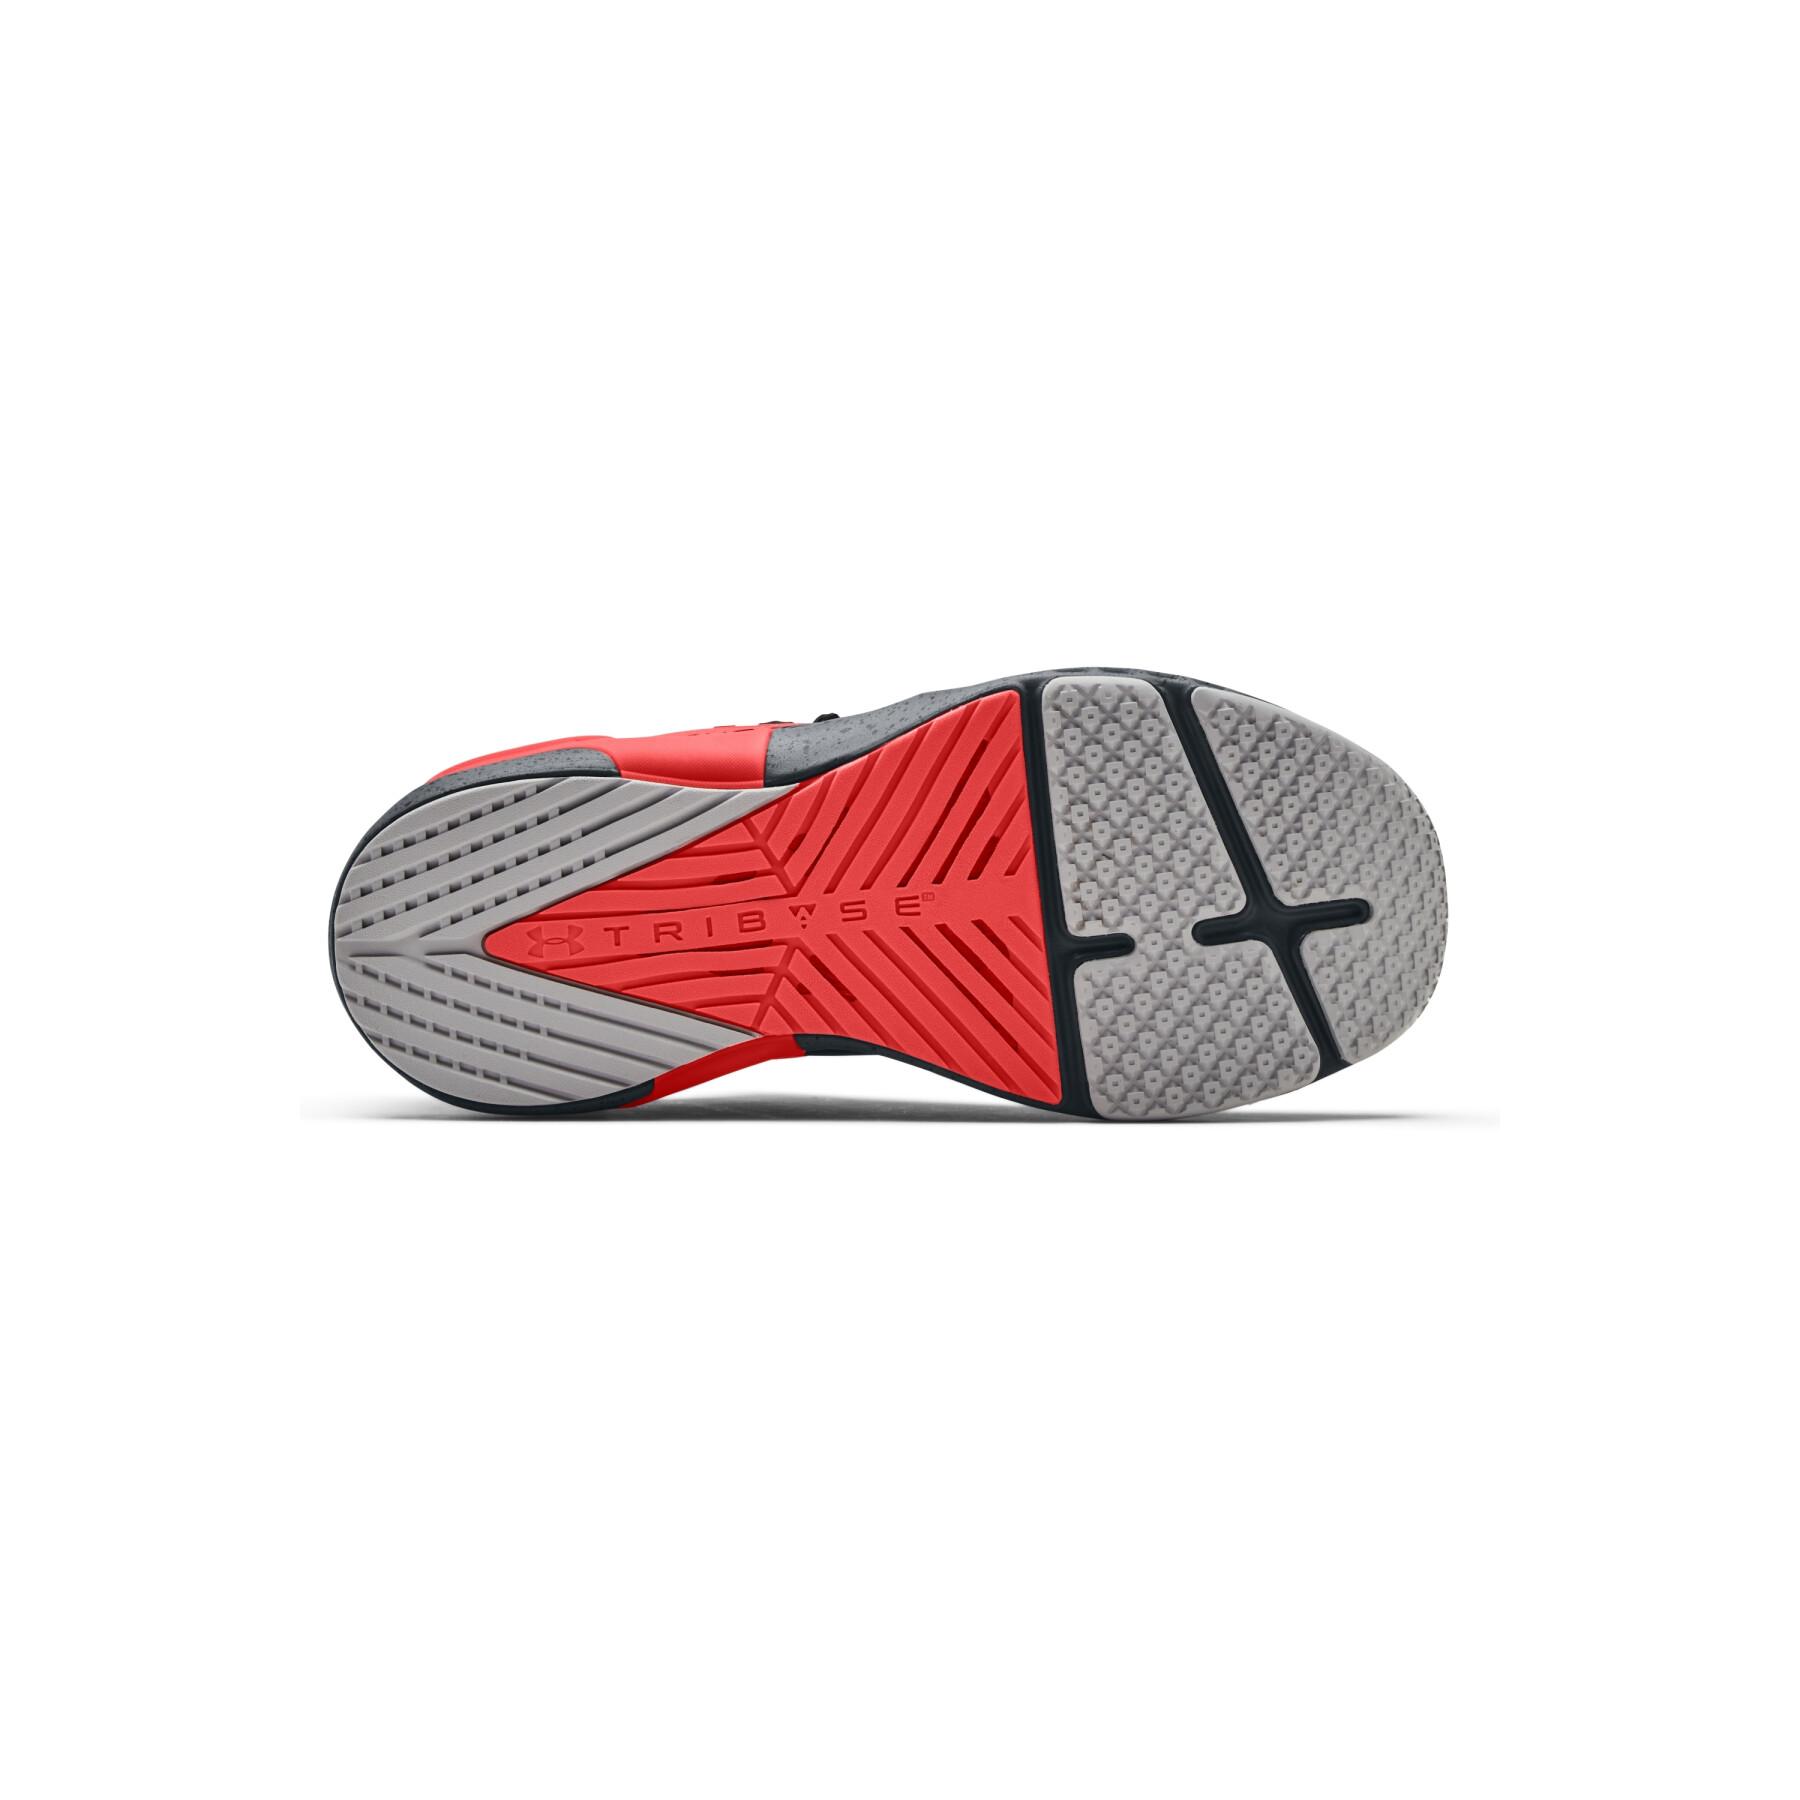 Buty Under Armour HOVR™ Apex 2